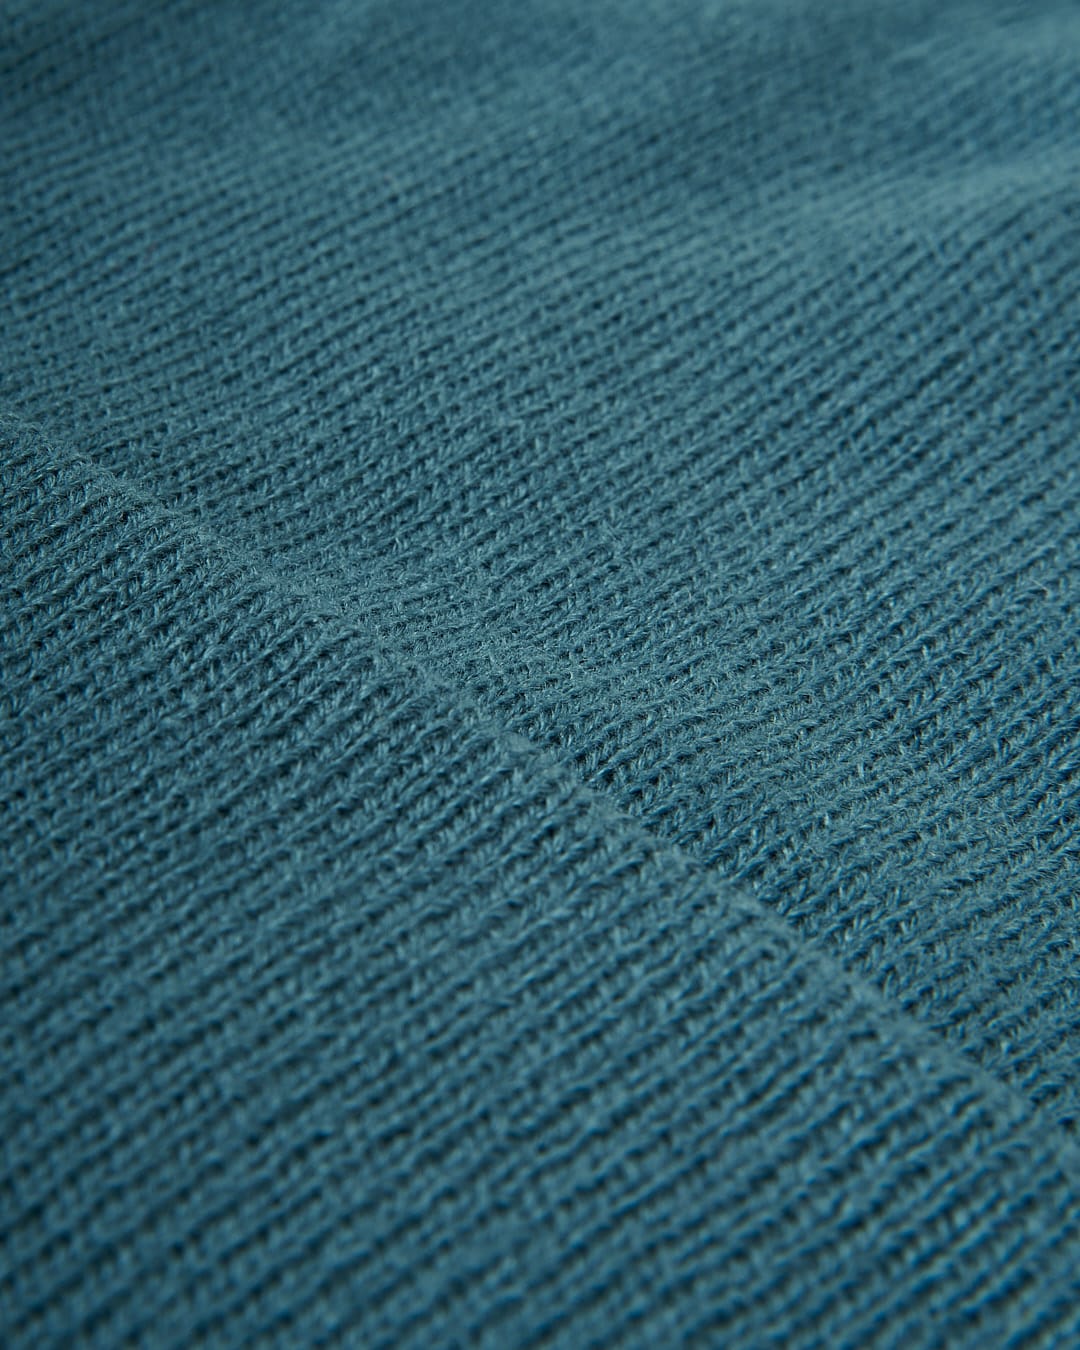 A close up image of the Saltrock Ok - Tight Knit Beanie - Blue fabric.